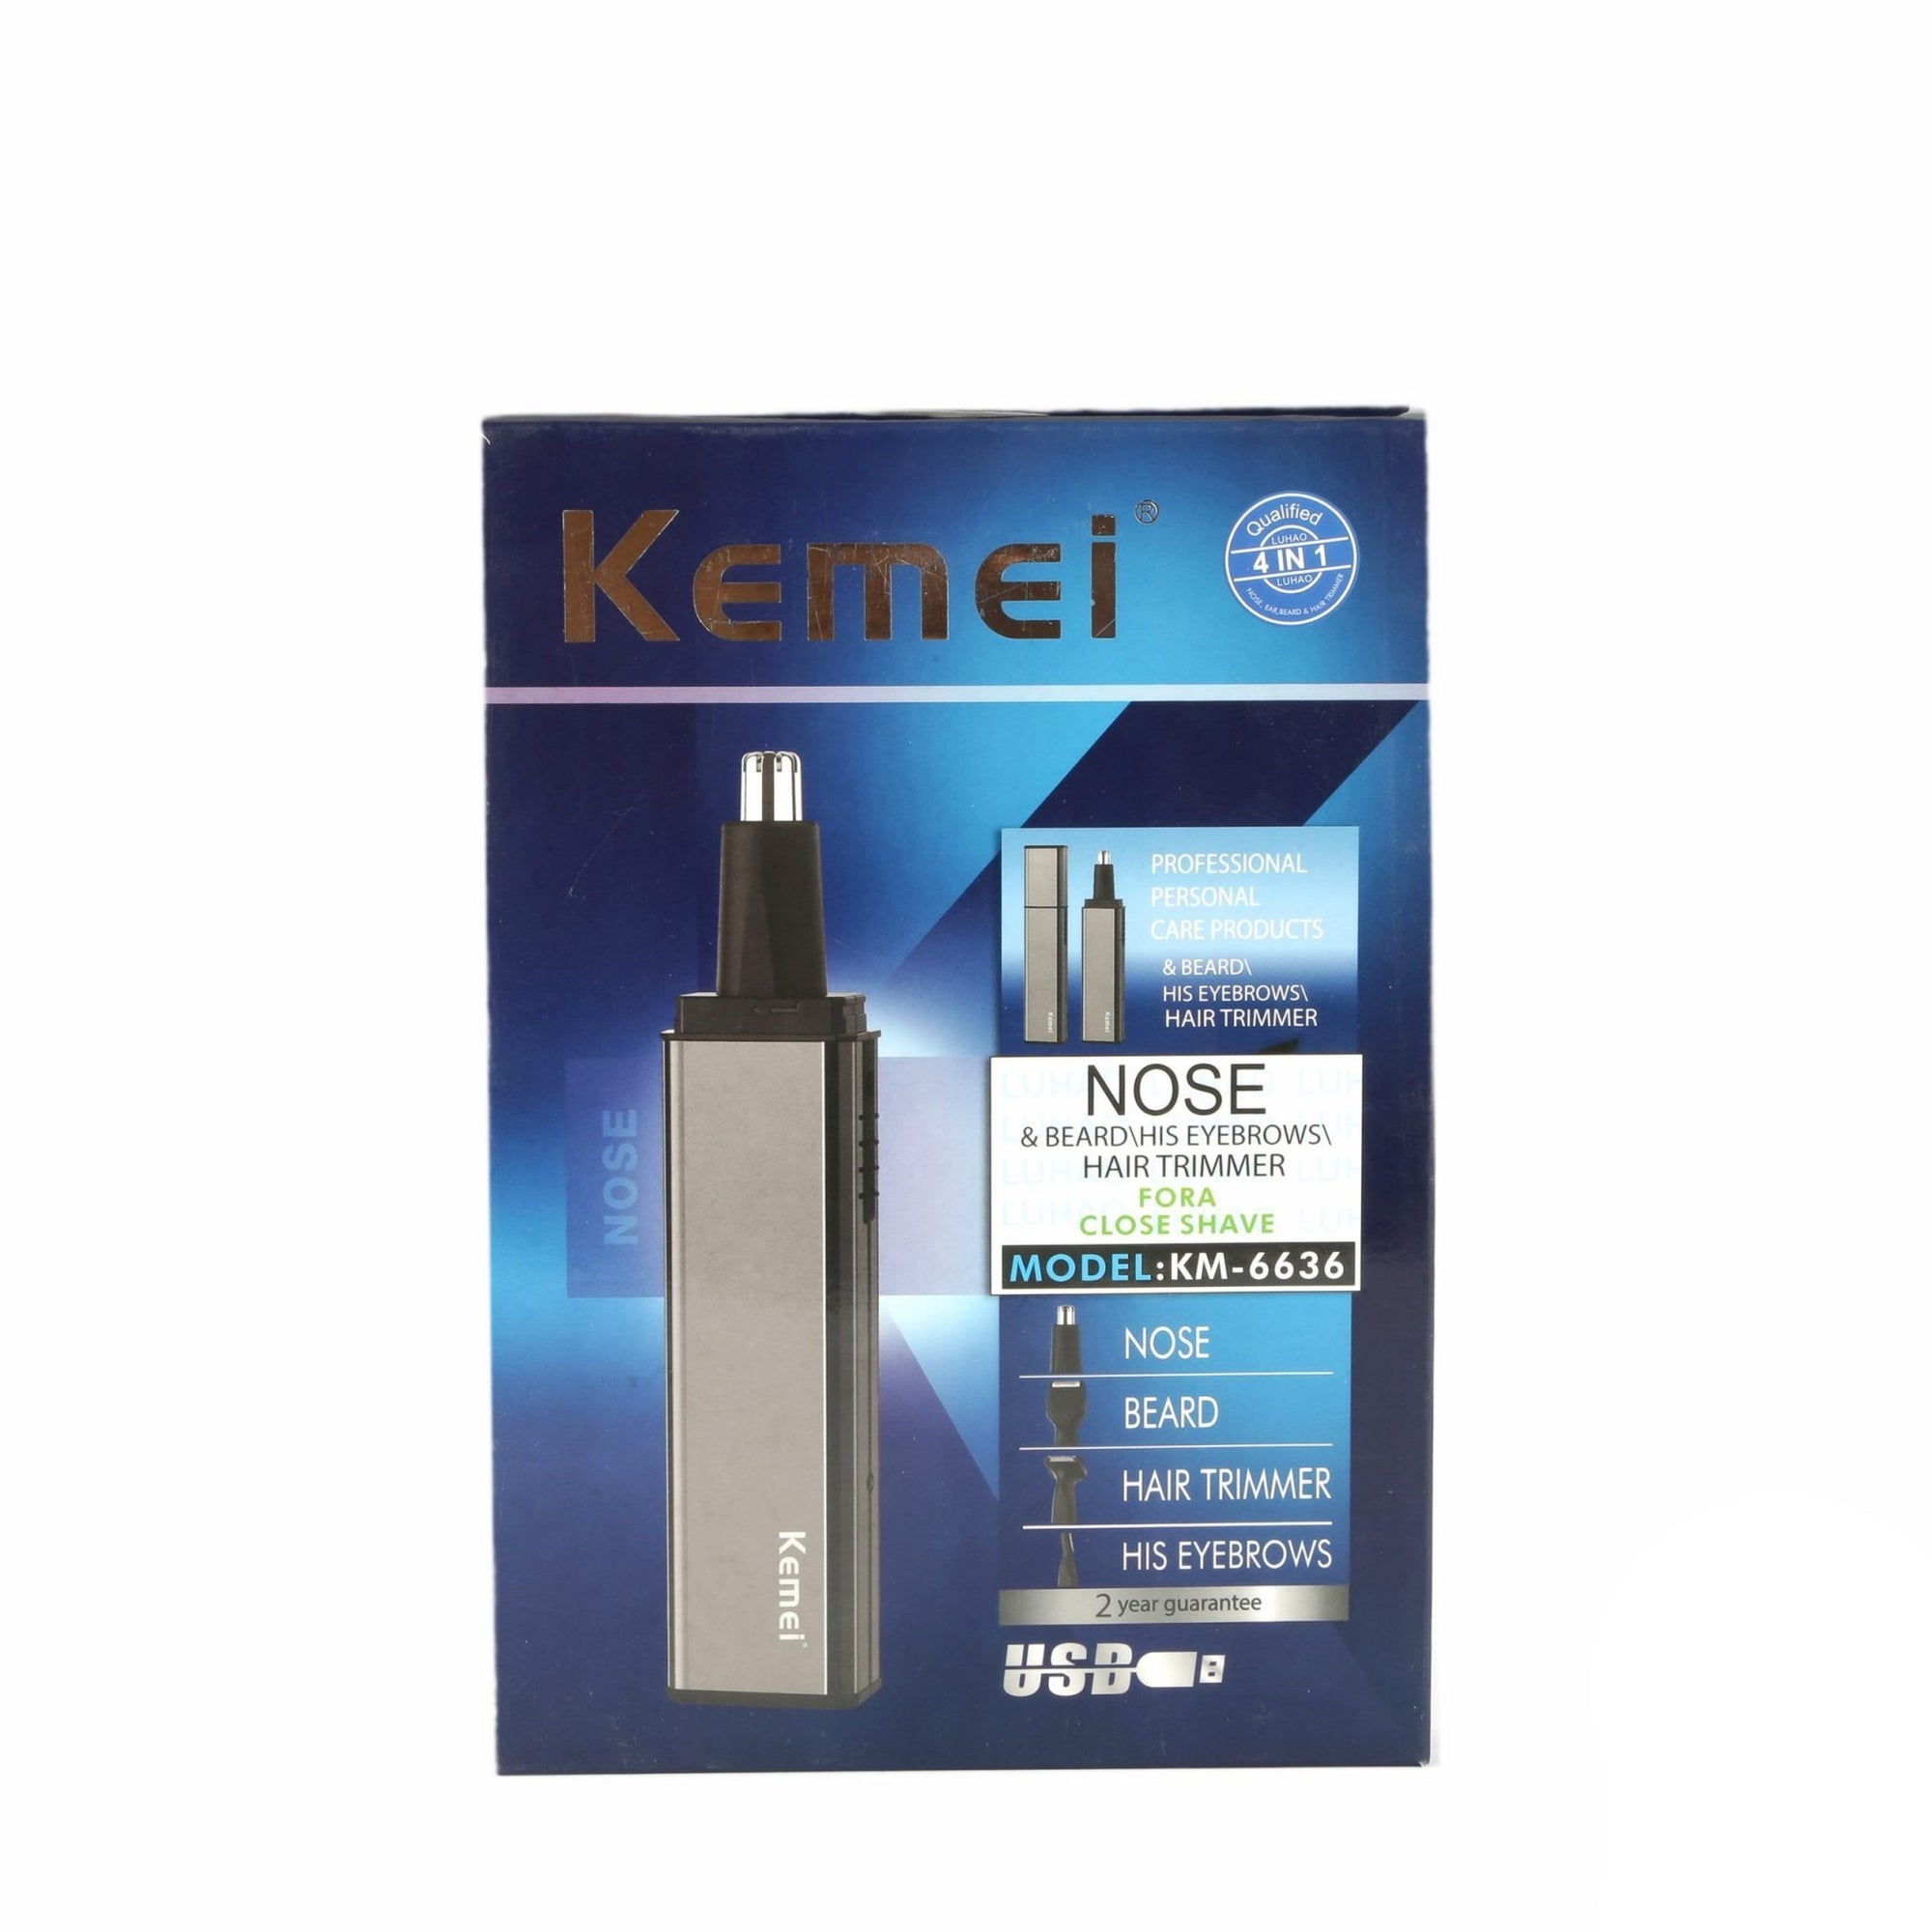 Kemei 4 in 1 Hair Trimmer for Close Shave Nose / Beard / Eyebrow KM-6636 freeshipping - lasertag.pk